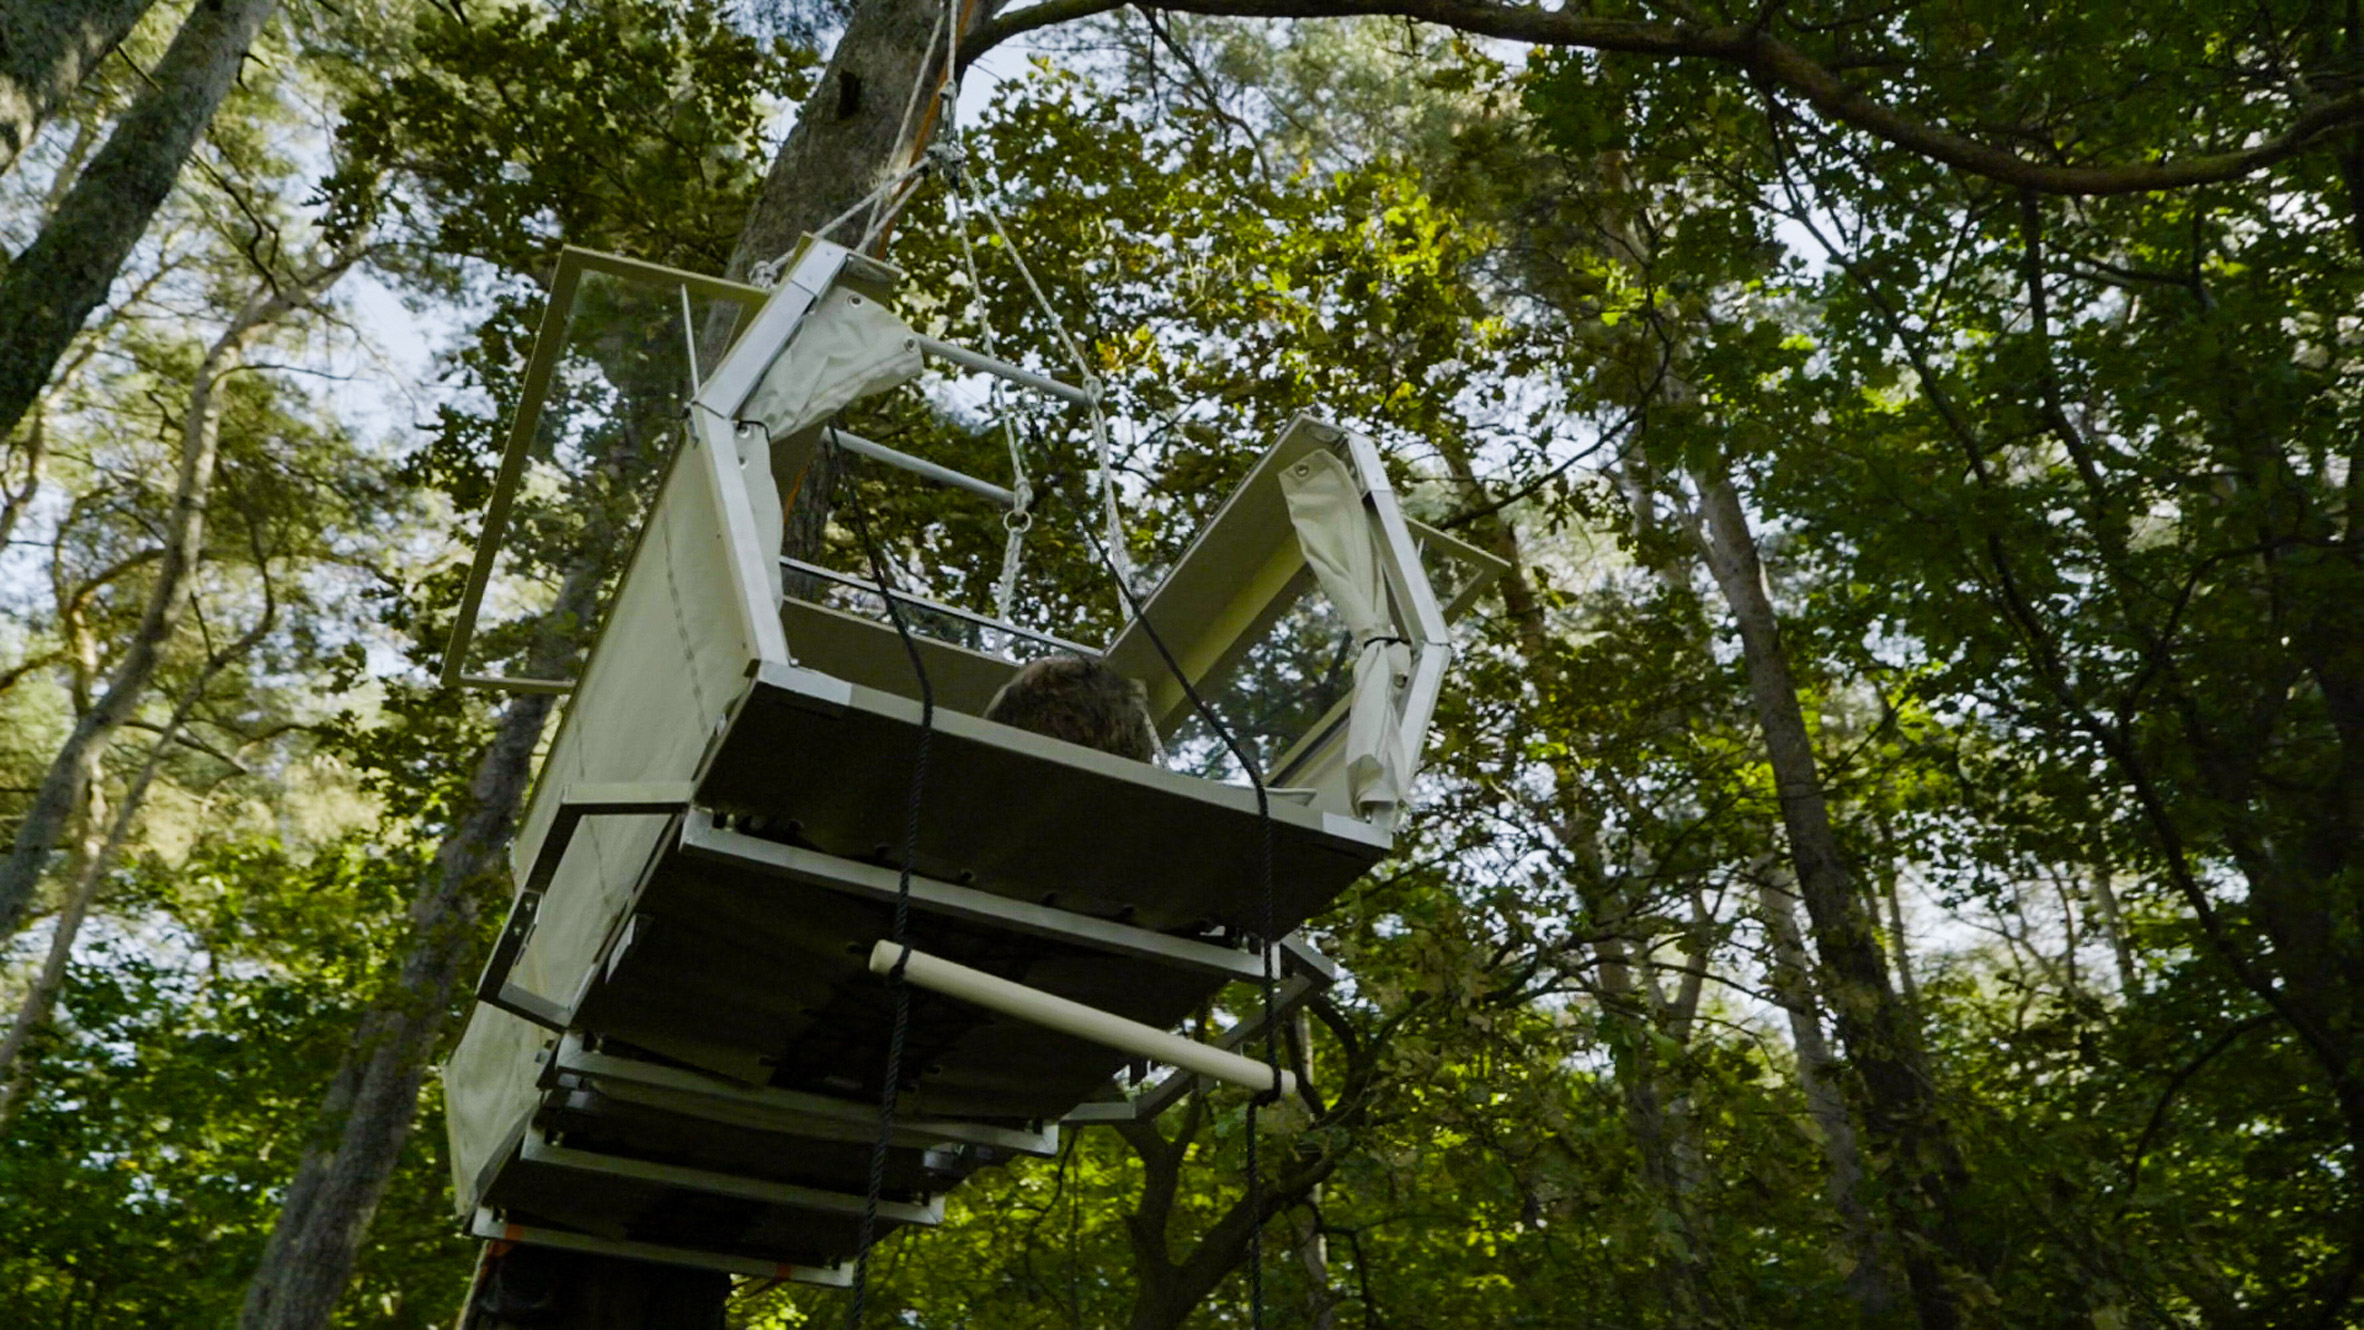 Trunk Bunk portable treehouse by Henry K Wein installed in a tree